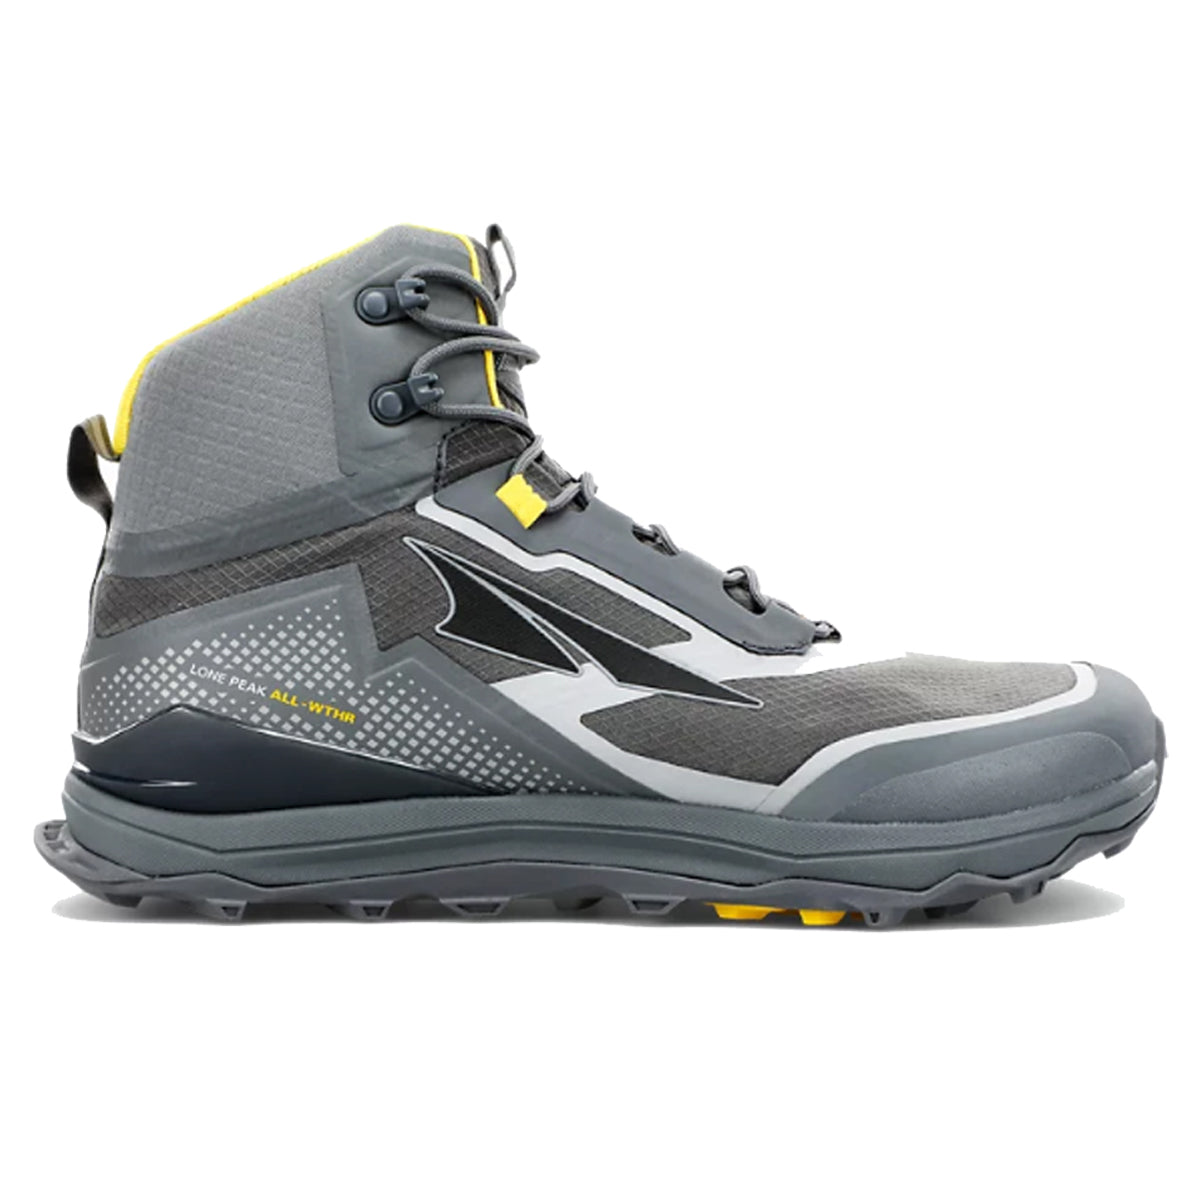 Altra Lone Peak All-WTHR Mid in Gray & Yellow by GOHUNT | Altra - GOHUNT Shop